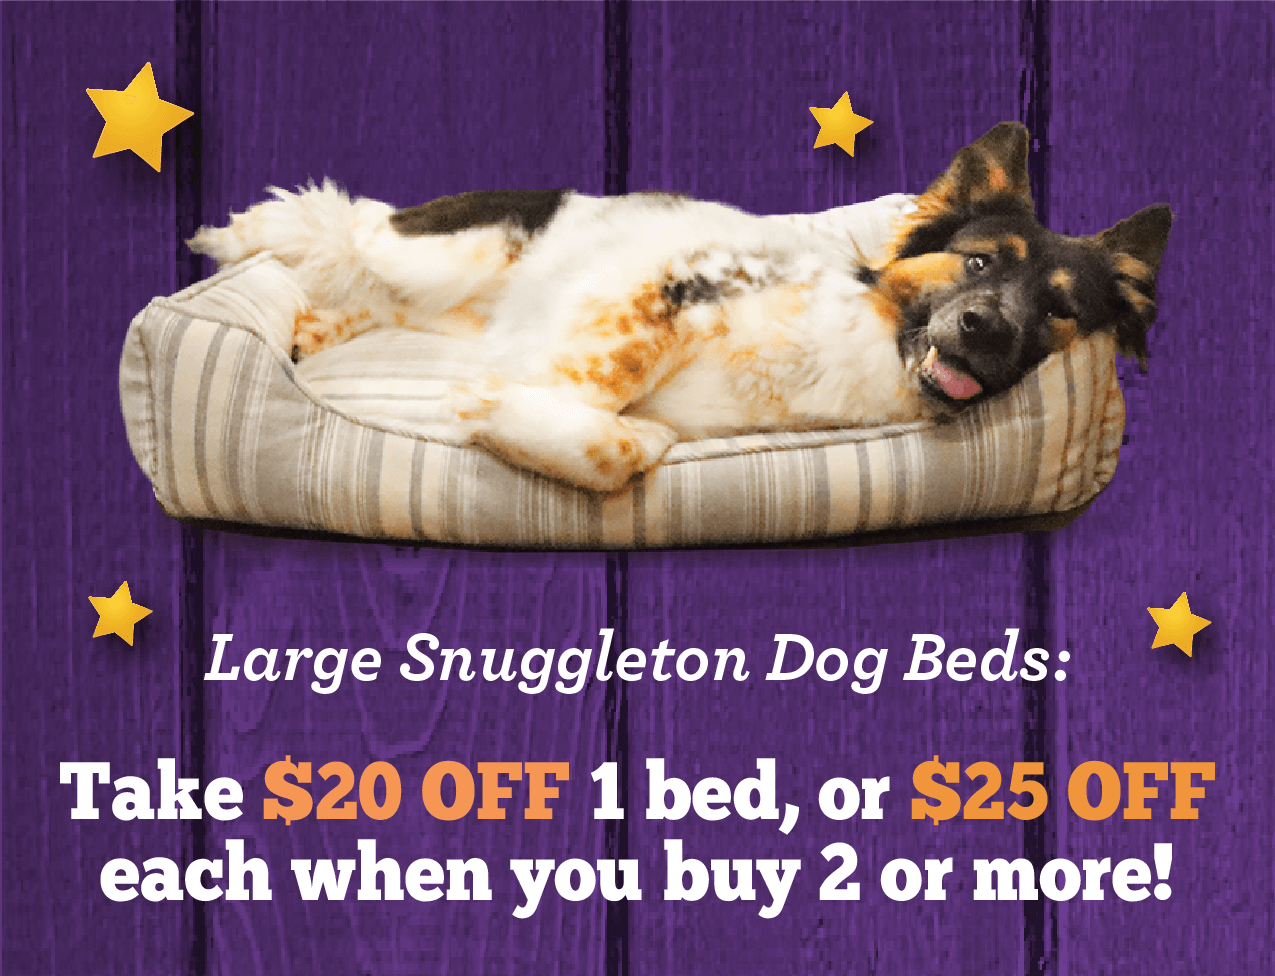 Large Snuggleton Dog Beds: Take $20 off 1 bed, or $25 off each when you buy 2 or more!